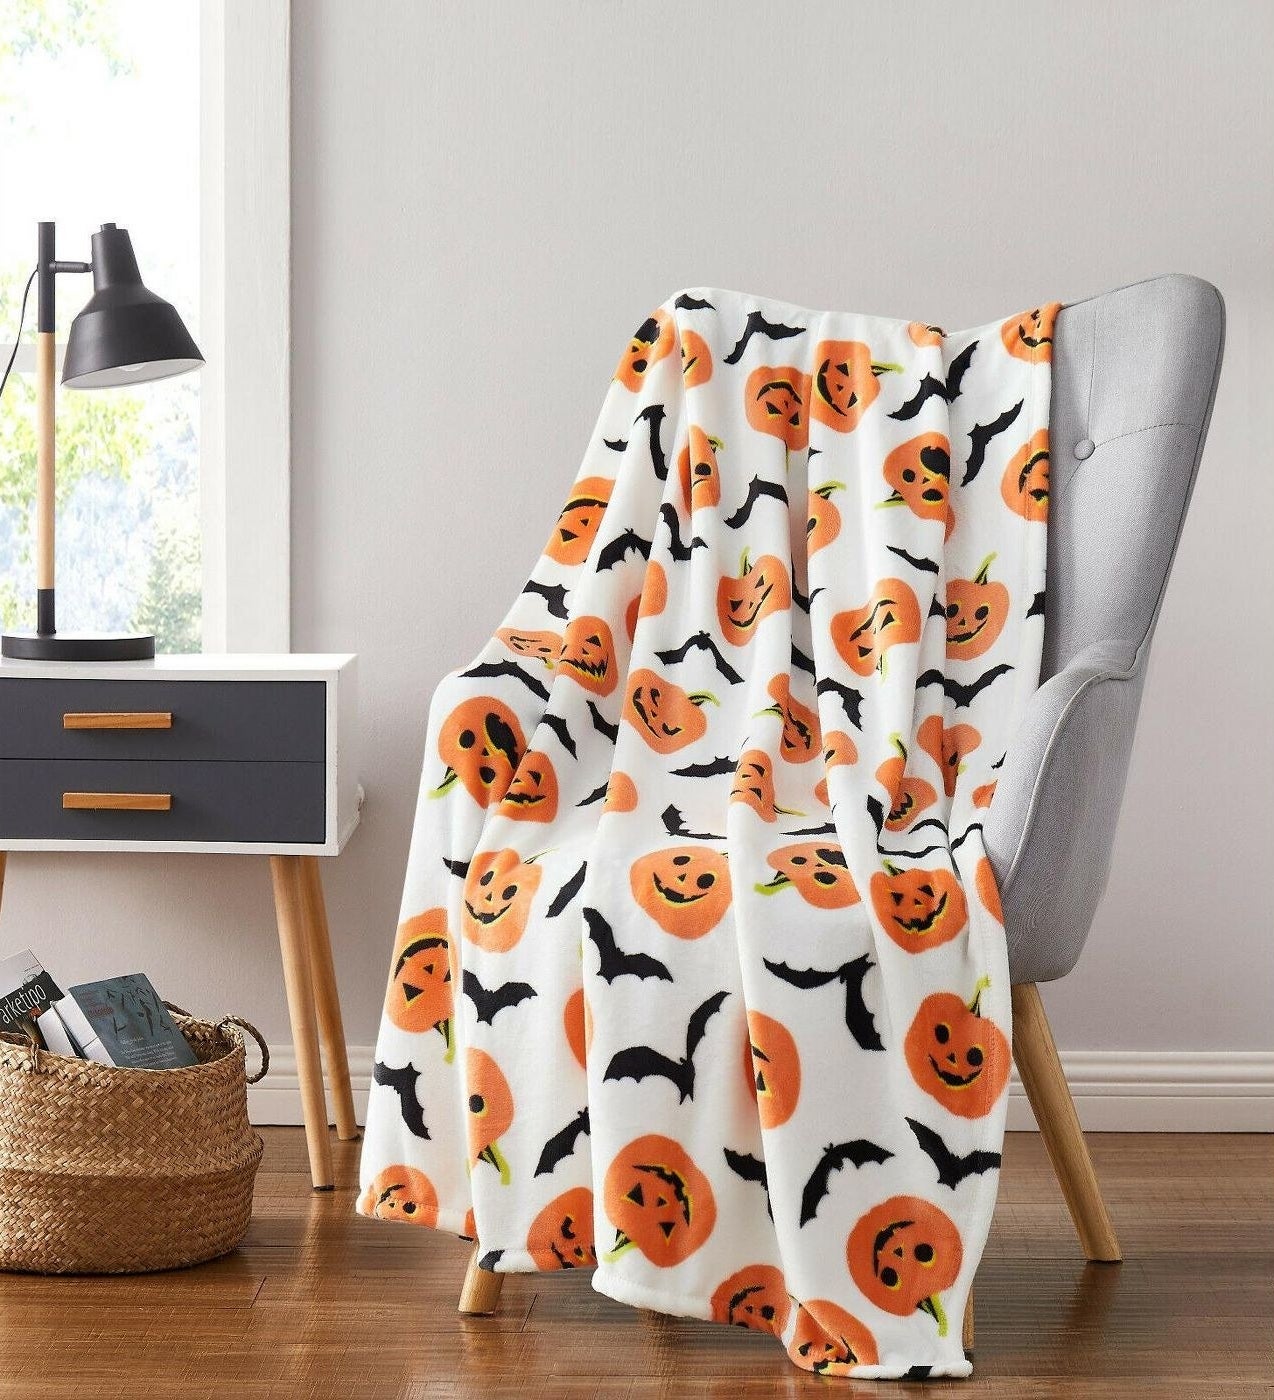 the bat and pumpkin patterned blanket on a chair